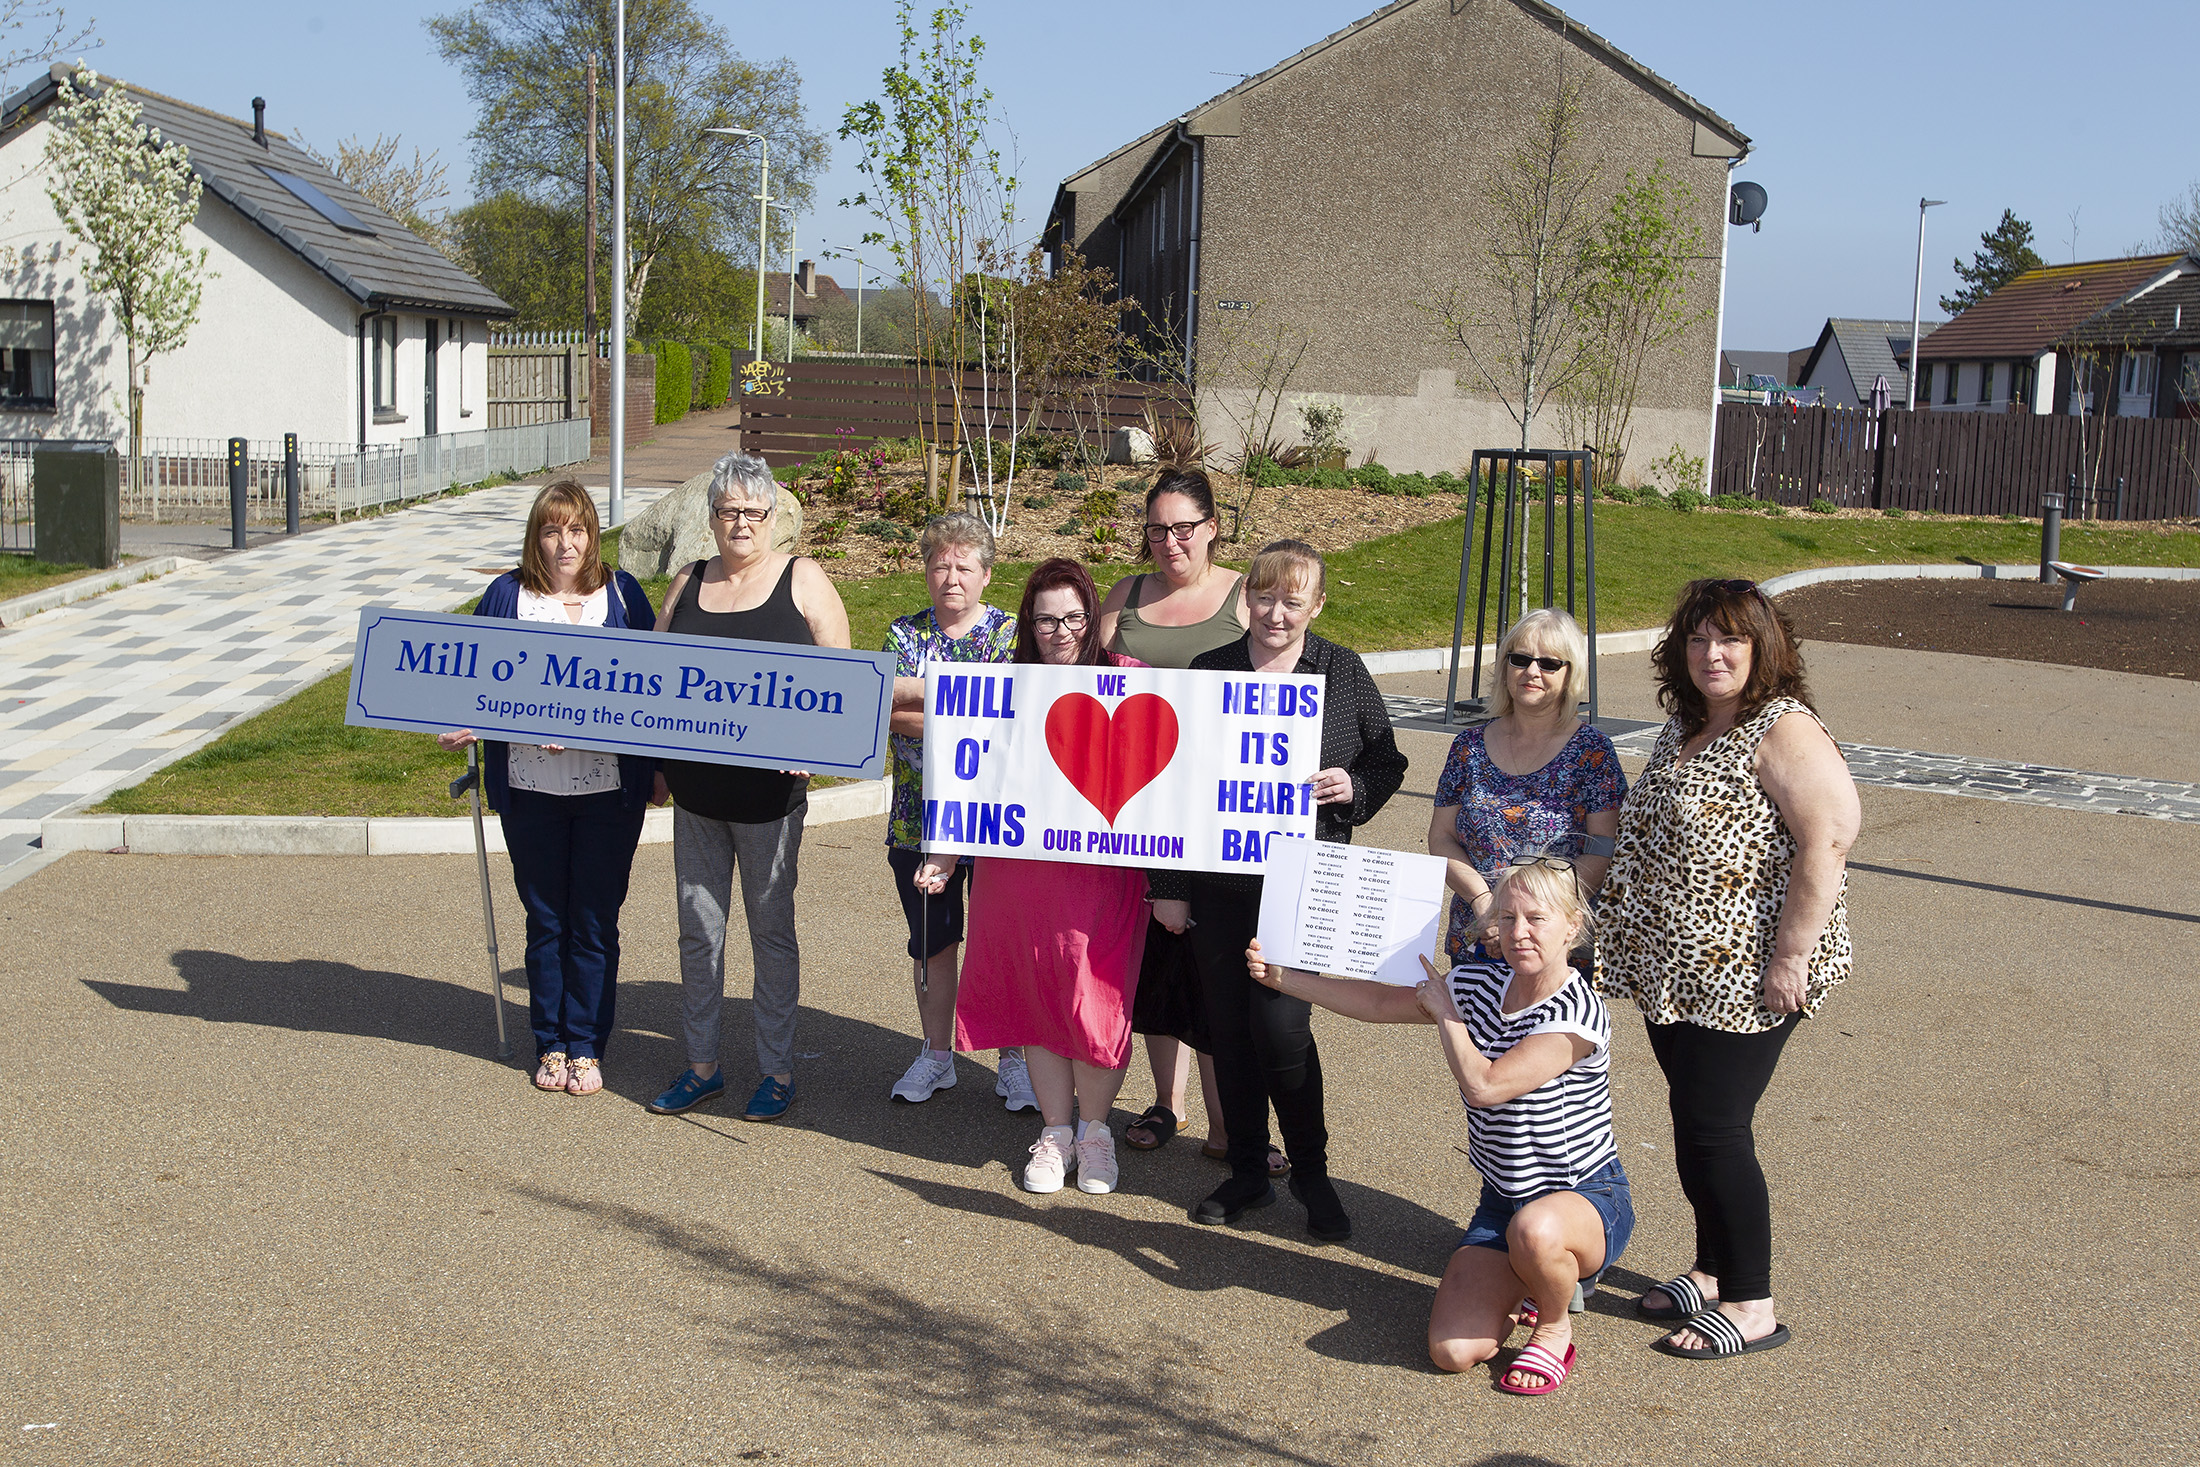 Members of the Mill o' Mains community group who are demanding a temporary replacement for the pavilion.